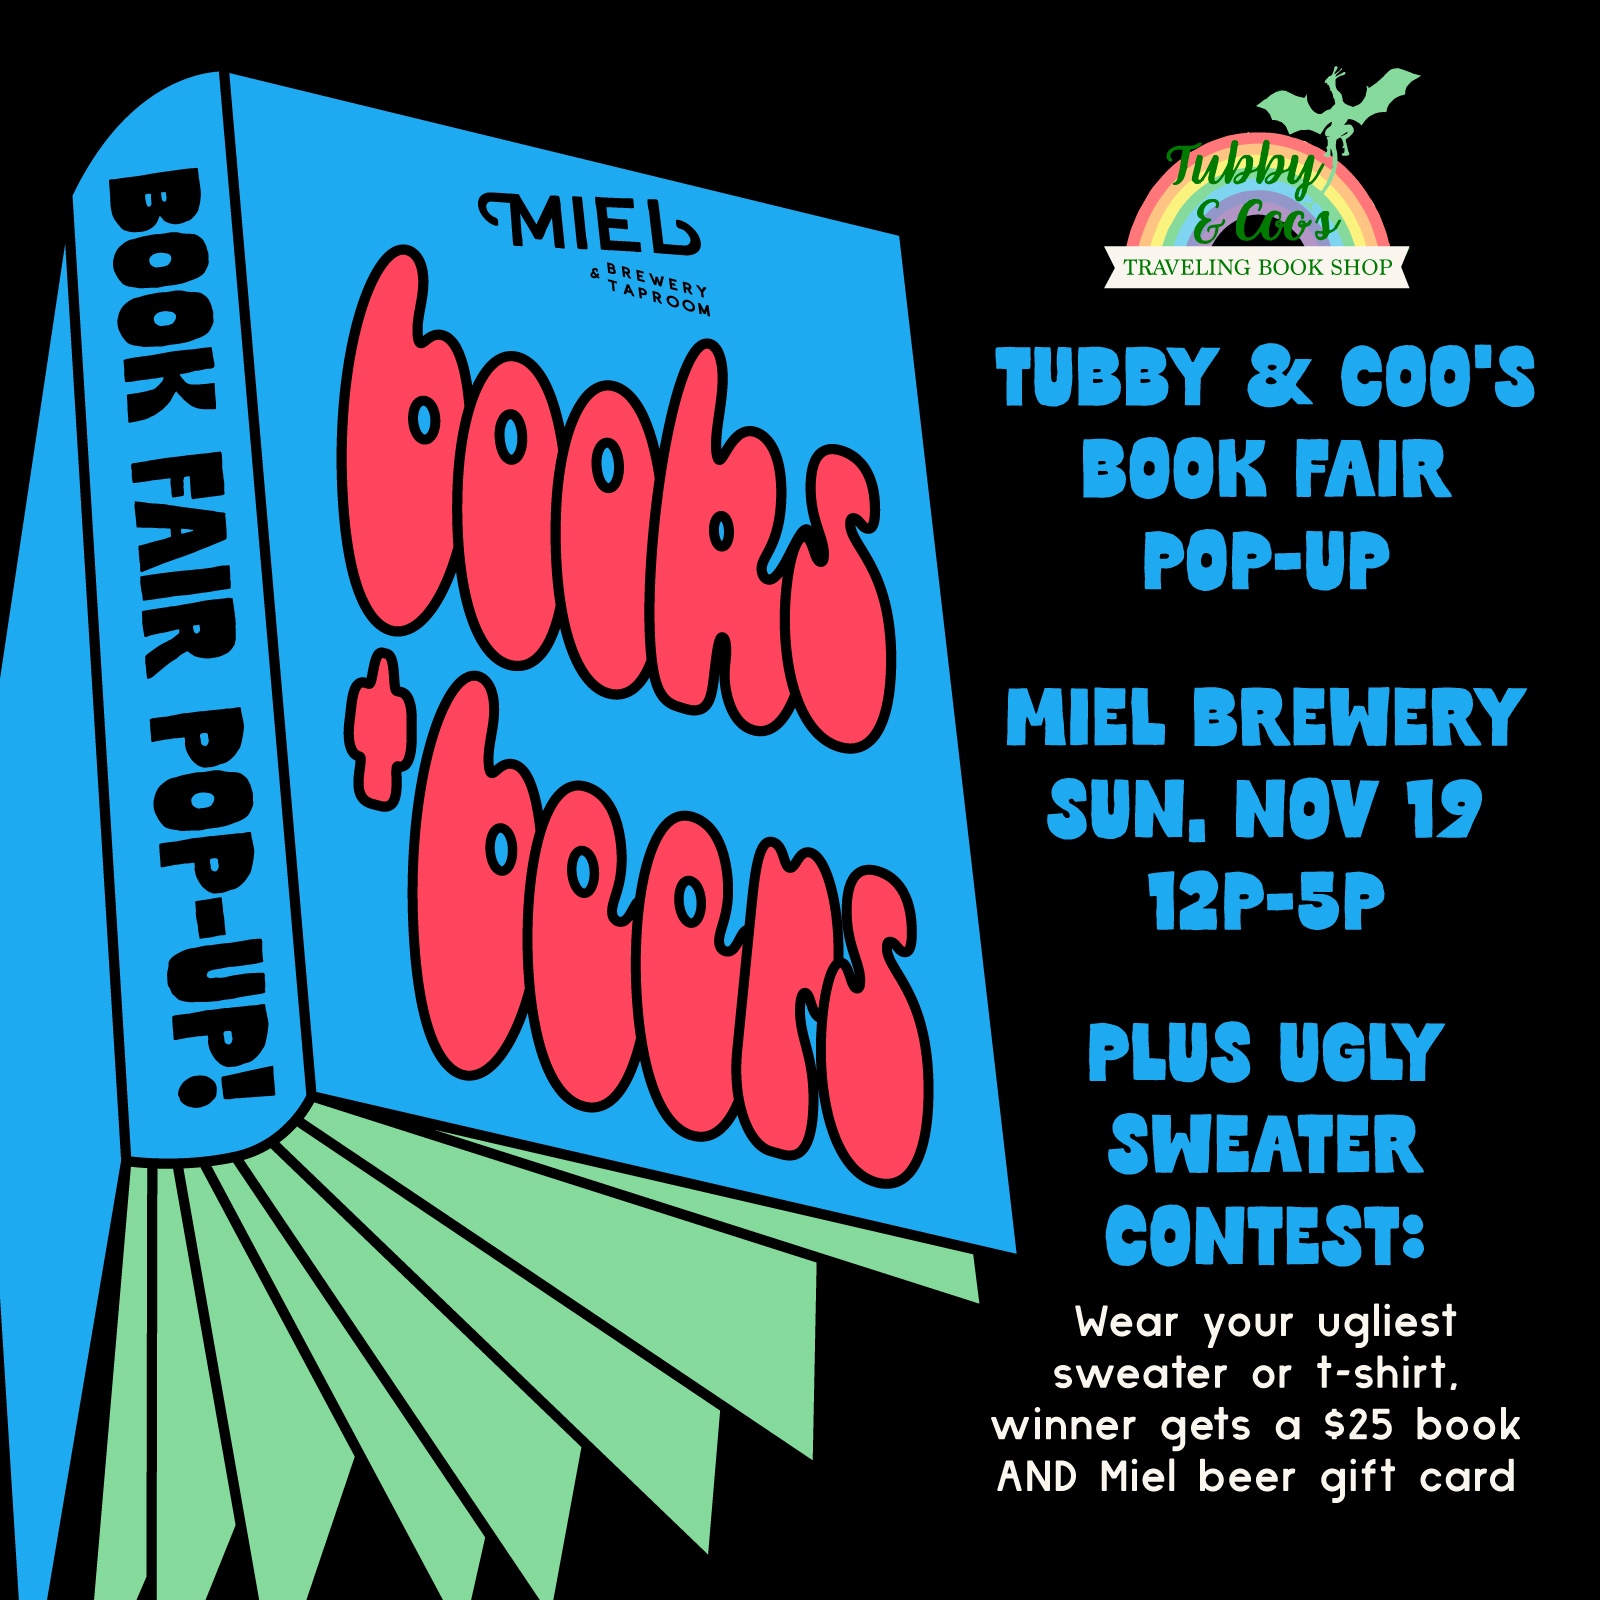 Tubby & Coo's Traveling Book Fair/shop at Miel Brewery square flyer